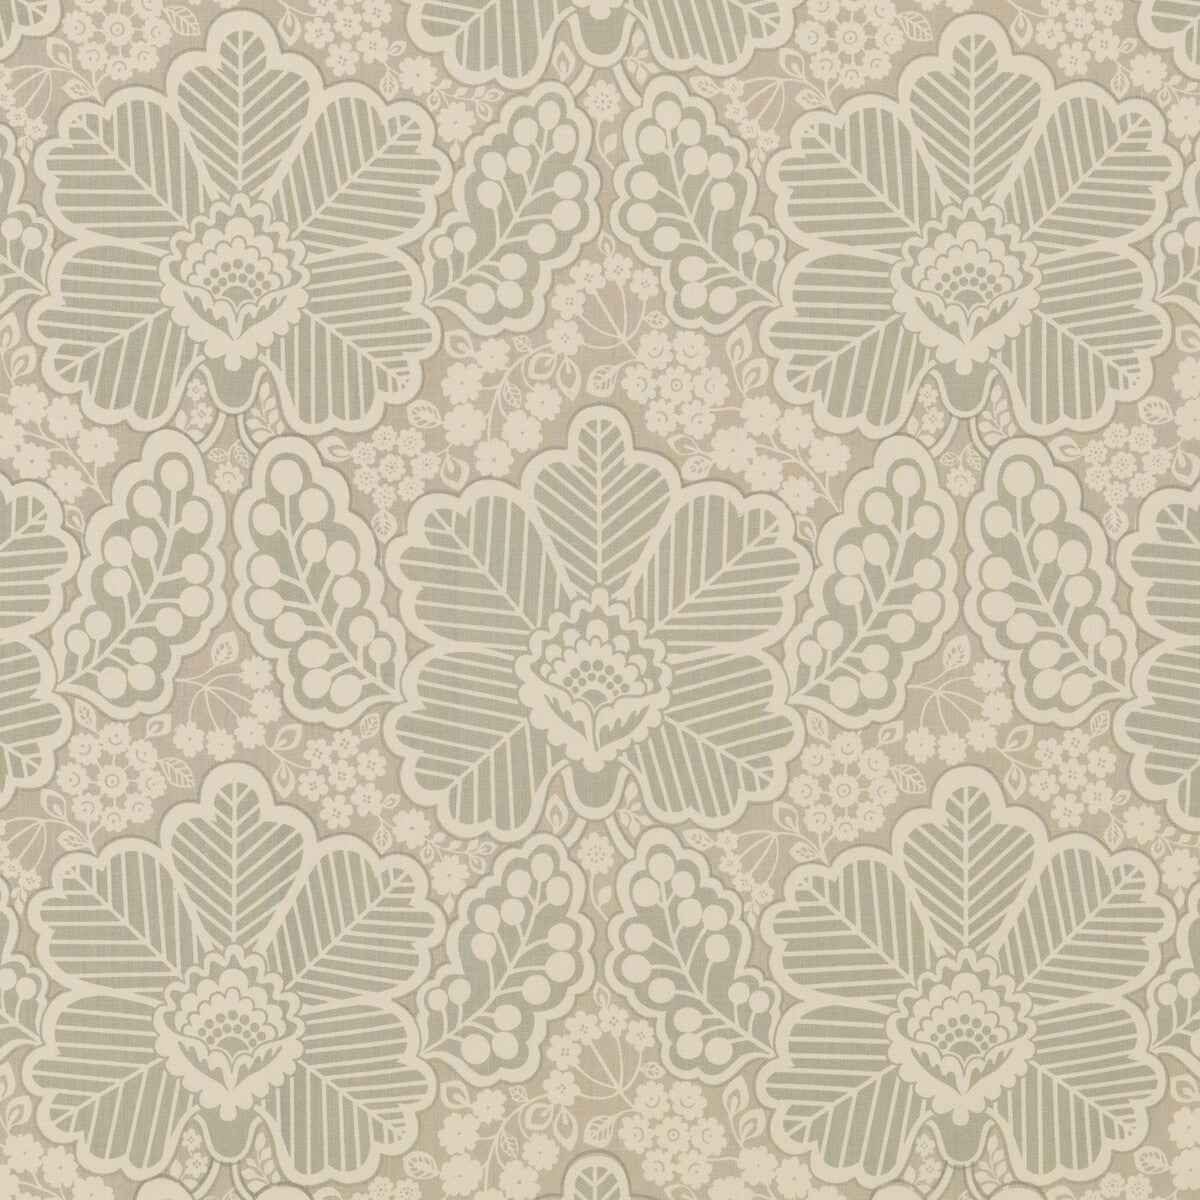 Arbour fabric in stone color - pattern PP50479.4.0 - by Baker Lifestyle in the Block Party collection